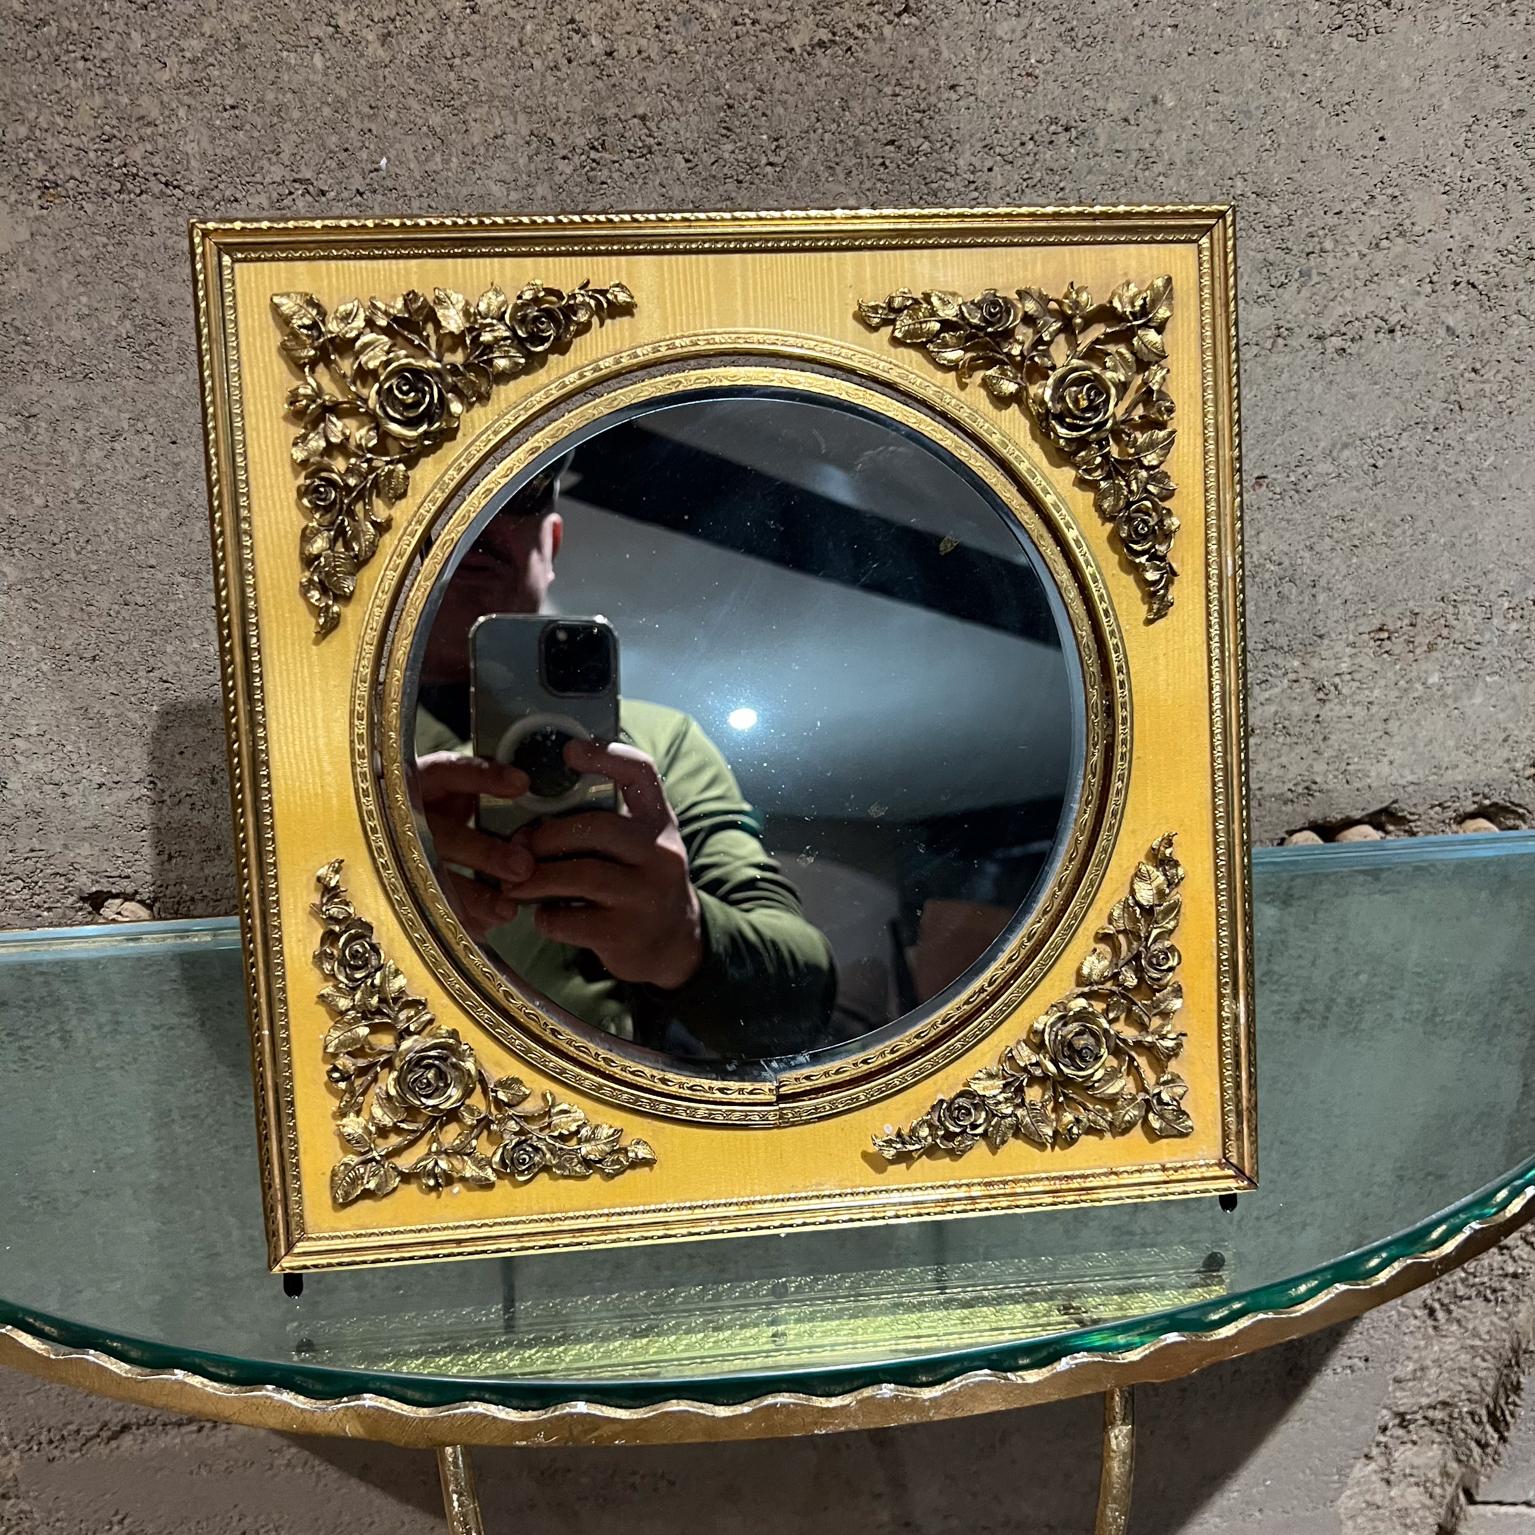 Antique Vintage Table Vanity Mirror French Ornamentation 
Double sided mirror; flat and convex mirror.
No label present. In the style of Fred K. Loeser & Co
11.25 x 11.25 x 1 thick x 9.5 d adjustable
Good original vintage preowned condition.
Review